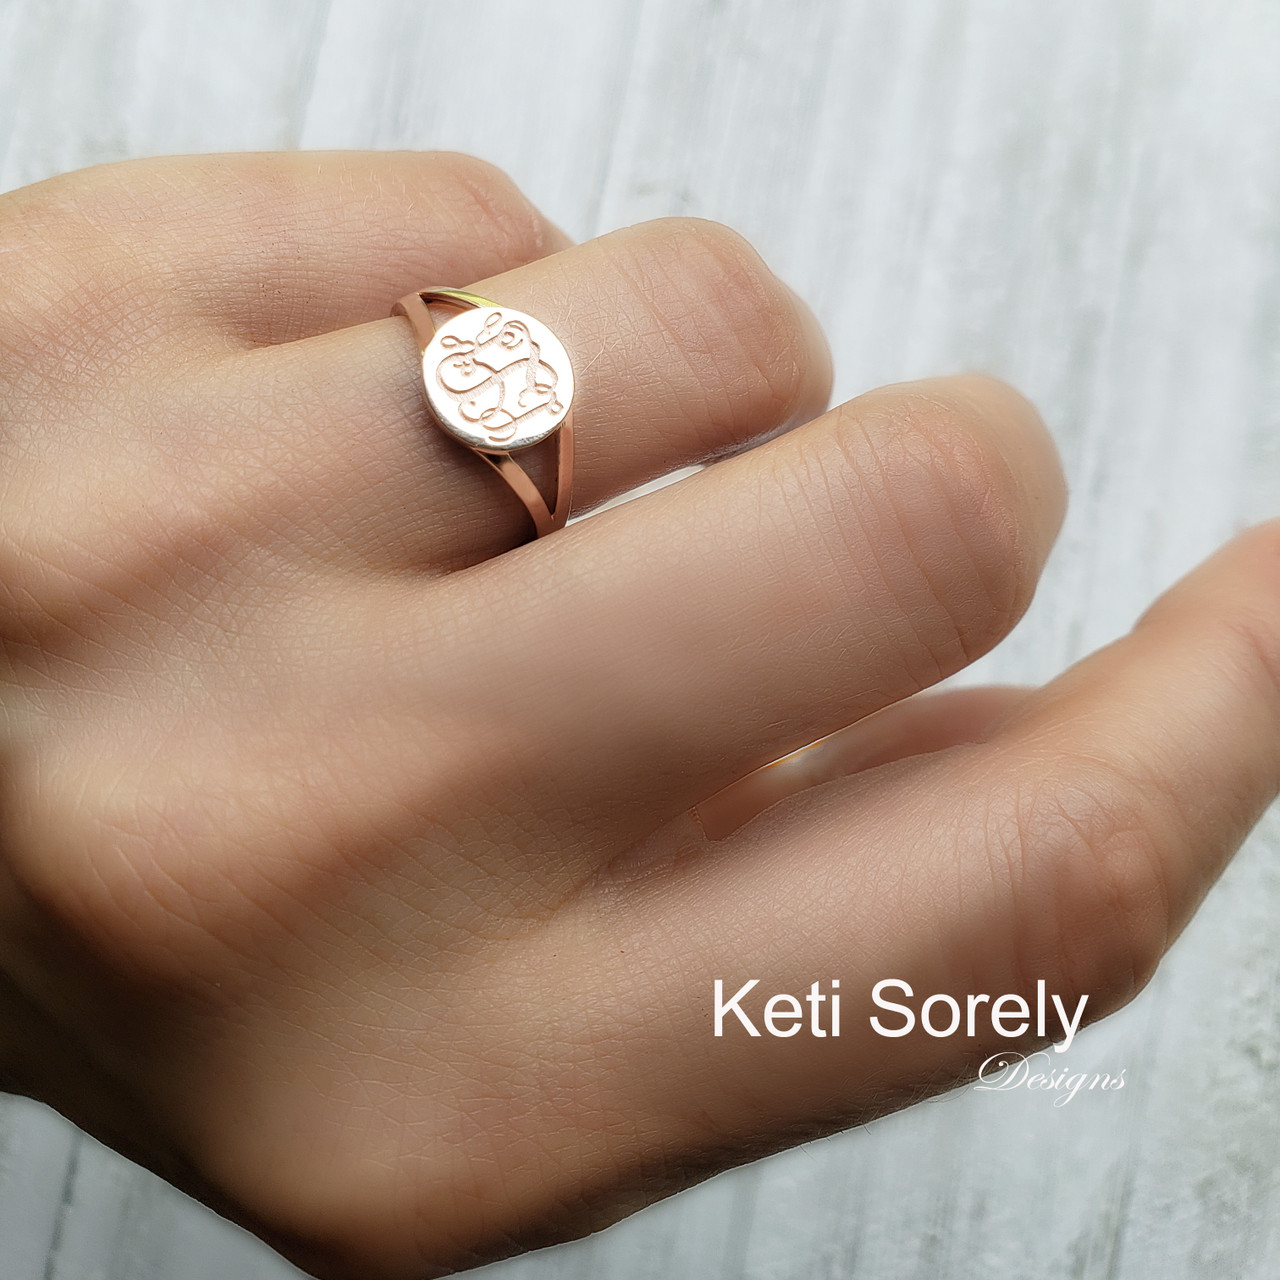 Monogrammed Jewelry Gold Ring Monogrammed Sterling Silver Ring Monogram Ring Personalized Ring Personalized Sterling Silver Ring